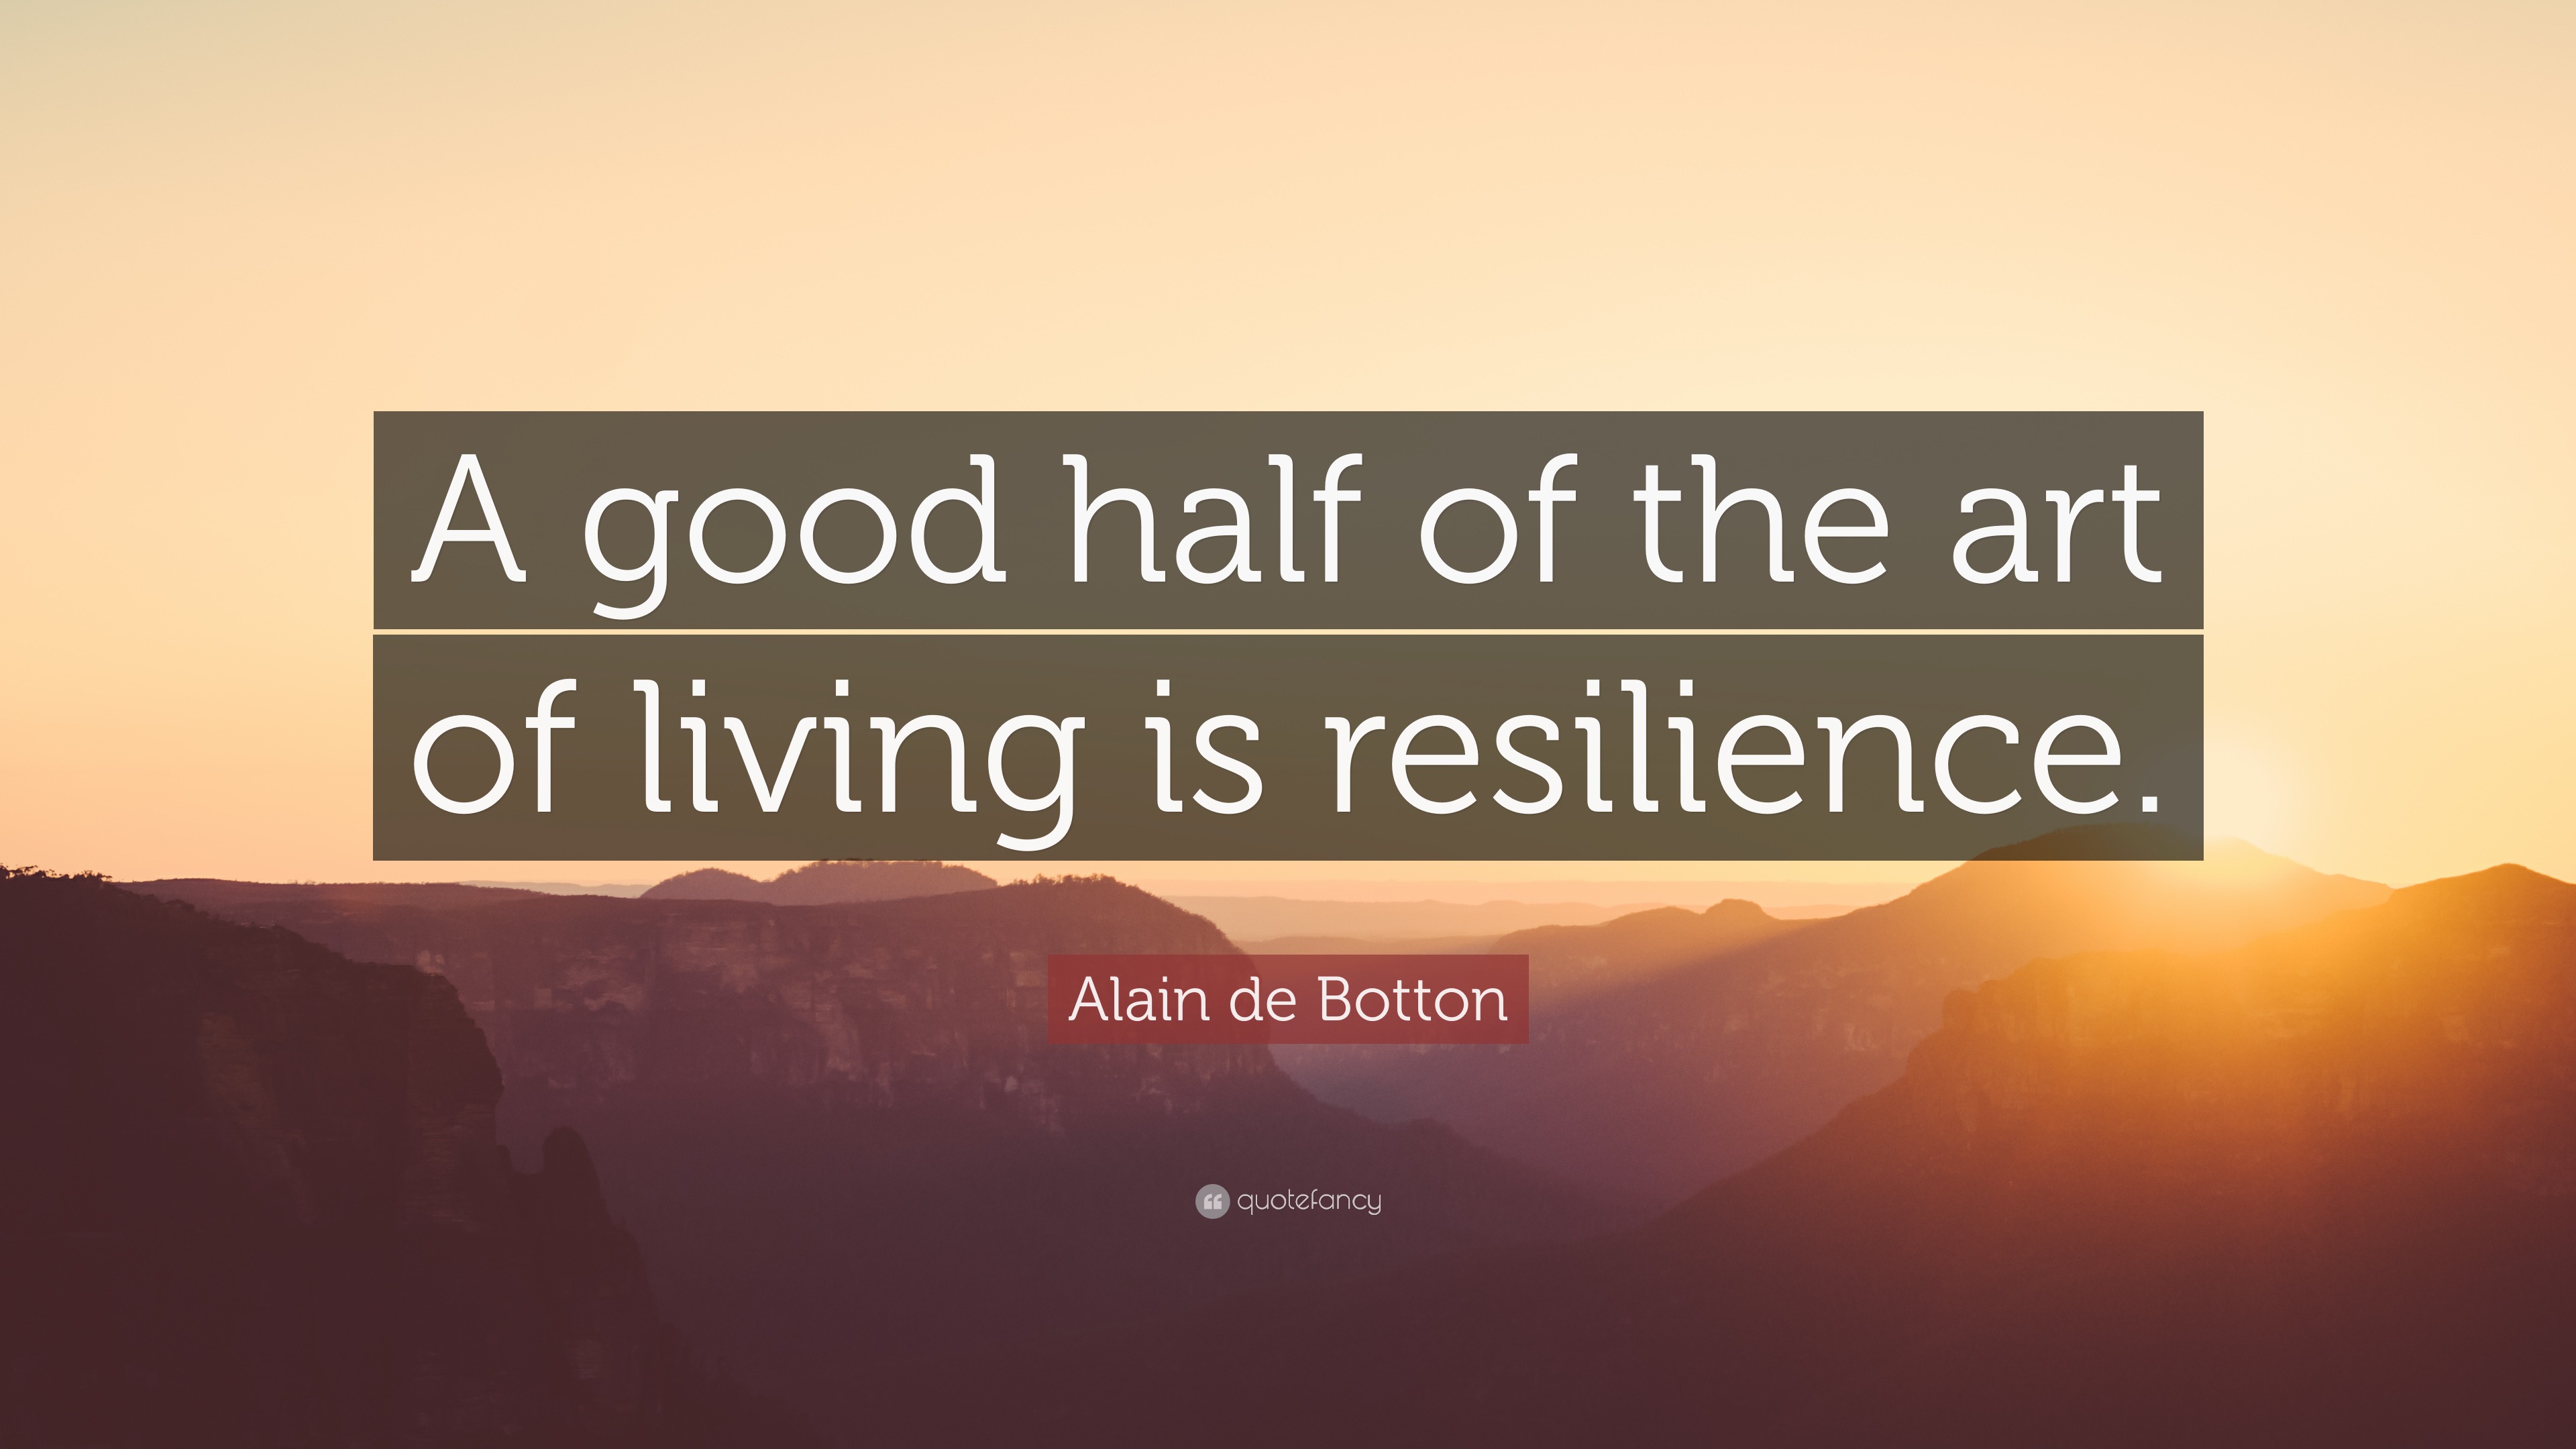 Alain de Botton Quote: “A good half of the art of living is resilience.”